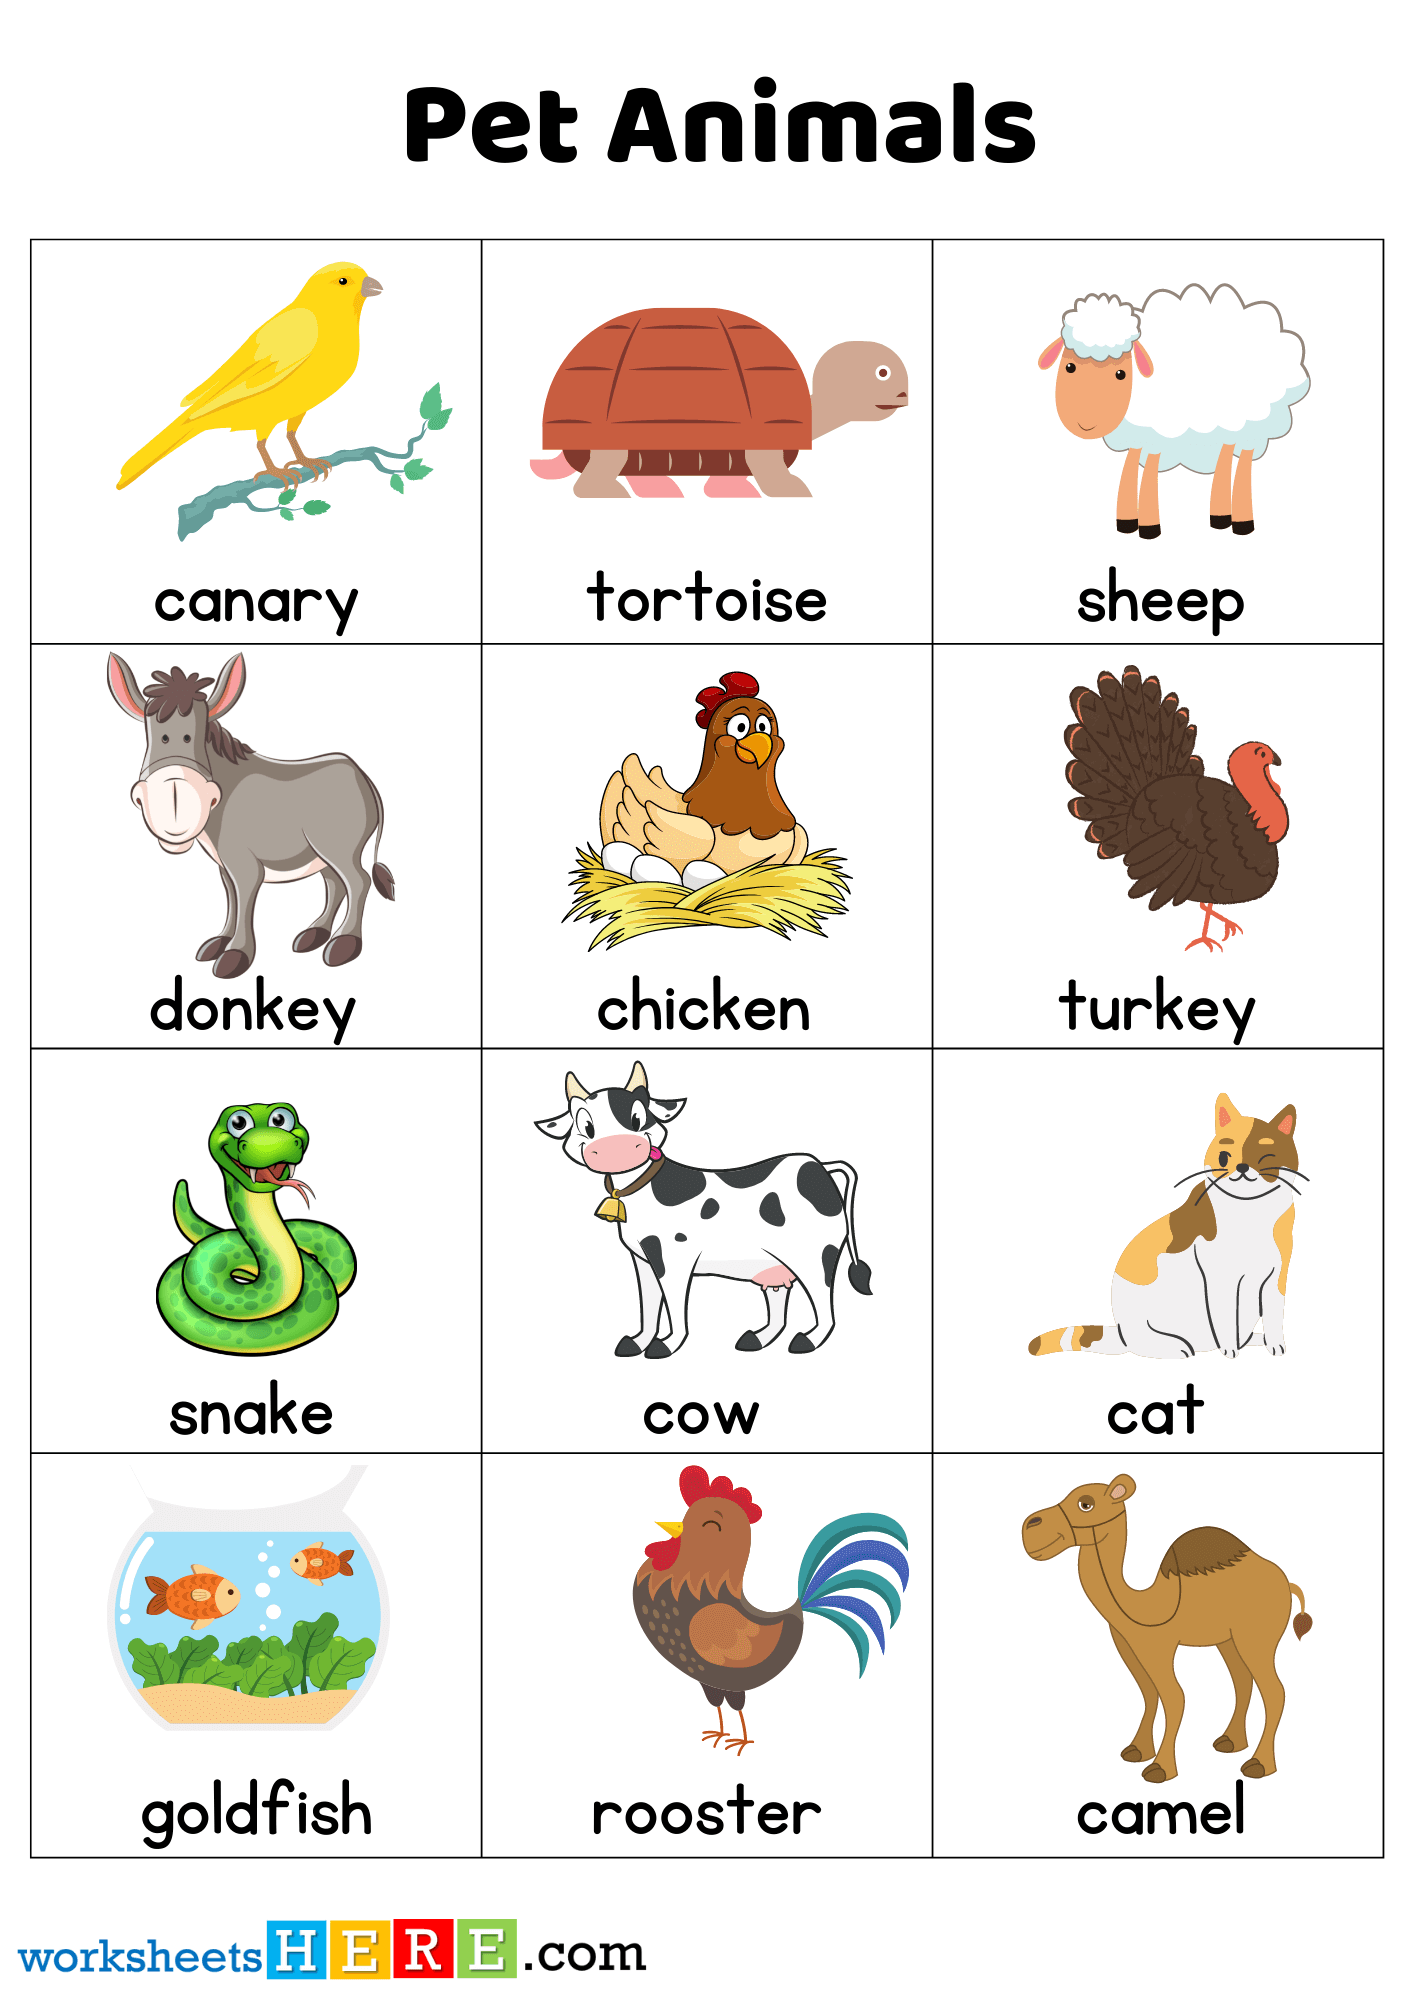 24 Pet Animals Names with Pictures Flashcards PDF Worksheets For Students